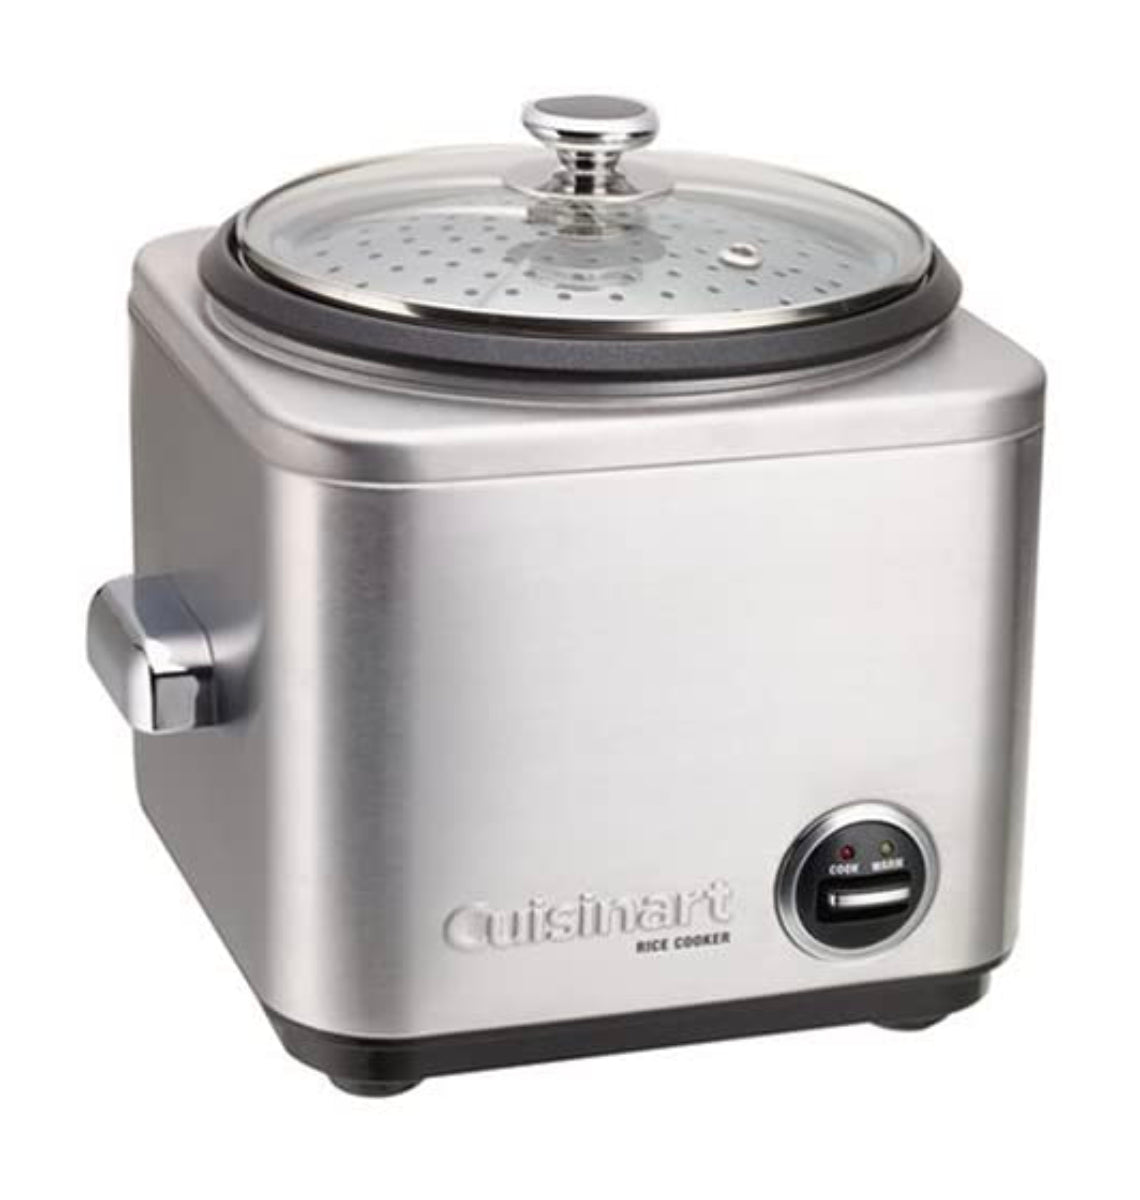 Cuisinart Rice Cooker/Steamer CRC-400 4 Cup Capacity Tested Working